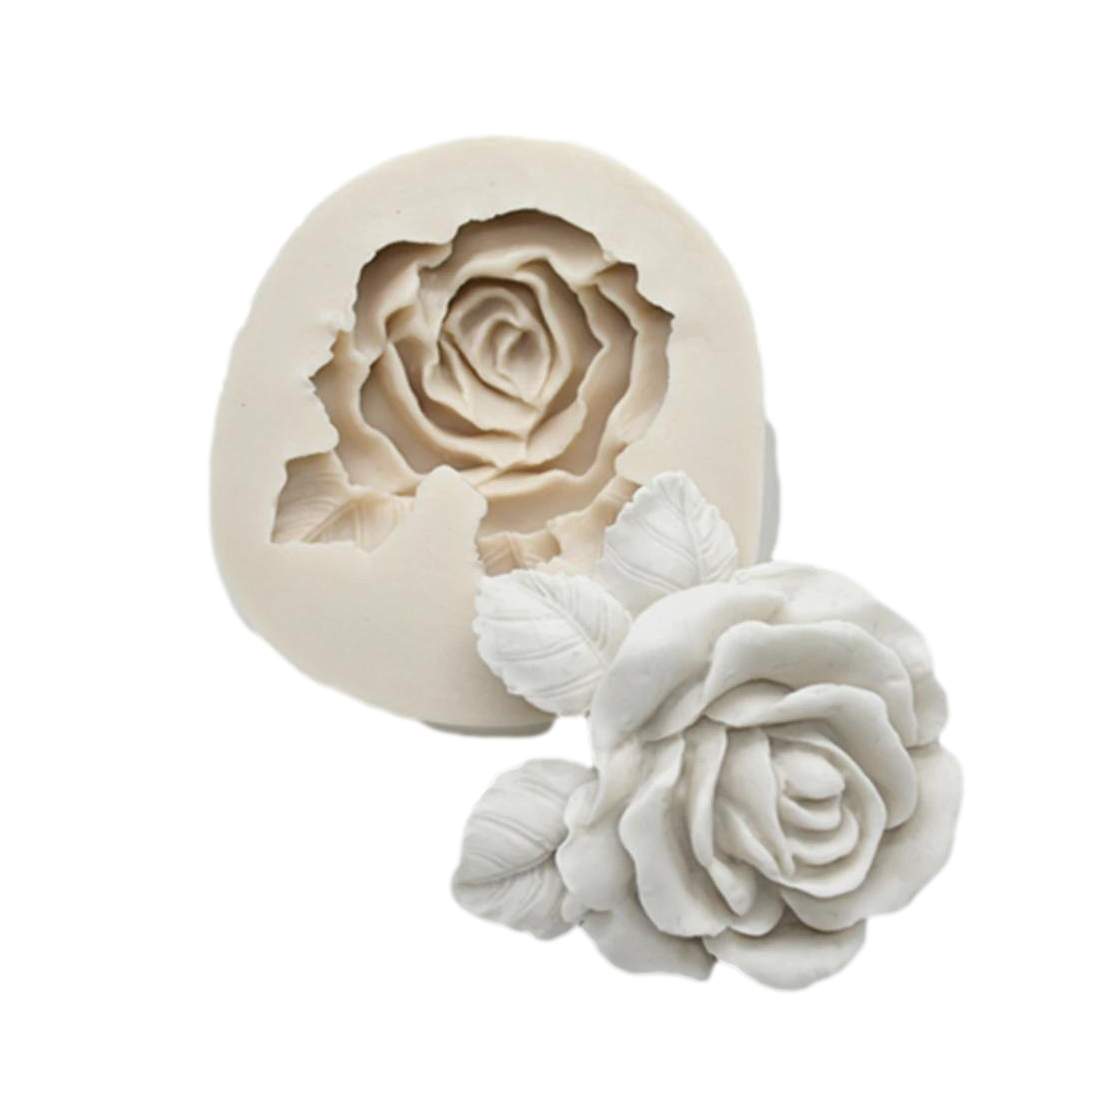 https://cake-decorating-supplies.net/wp-content/uploads/2021/07/3D-Rose-Flower-Silicone-Mold_clipped_rev_1_clipped_rev_1.png